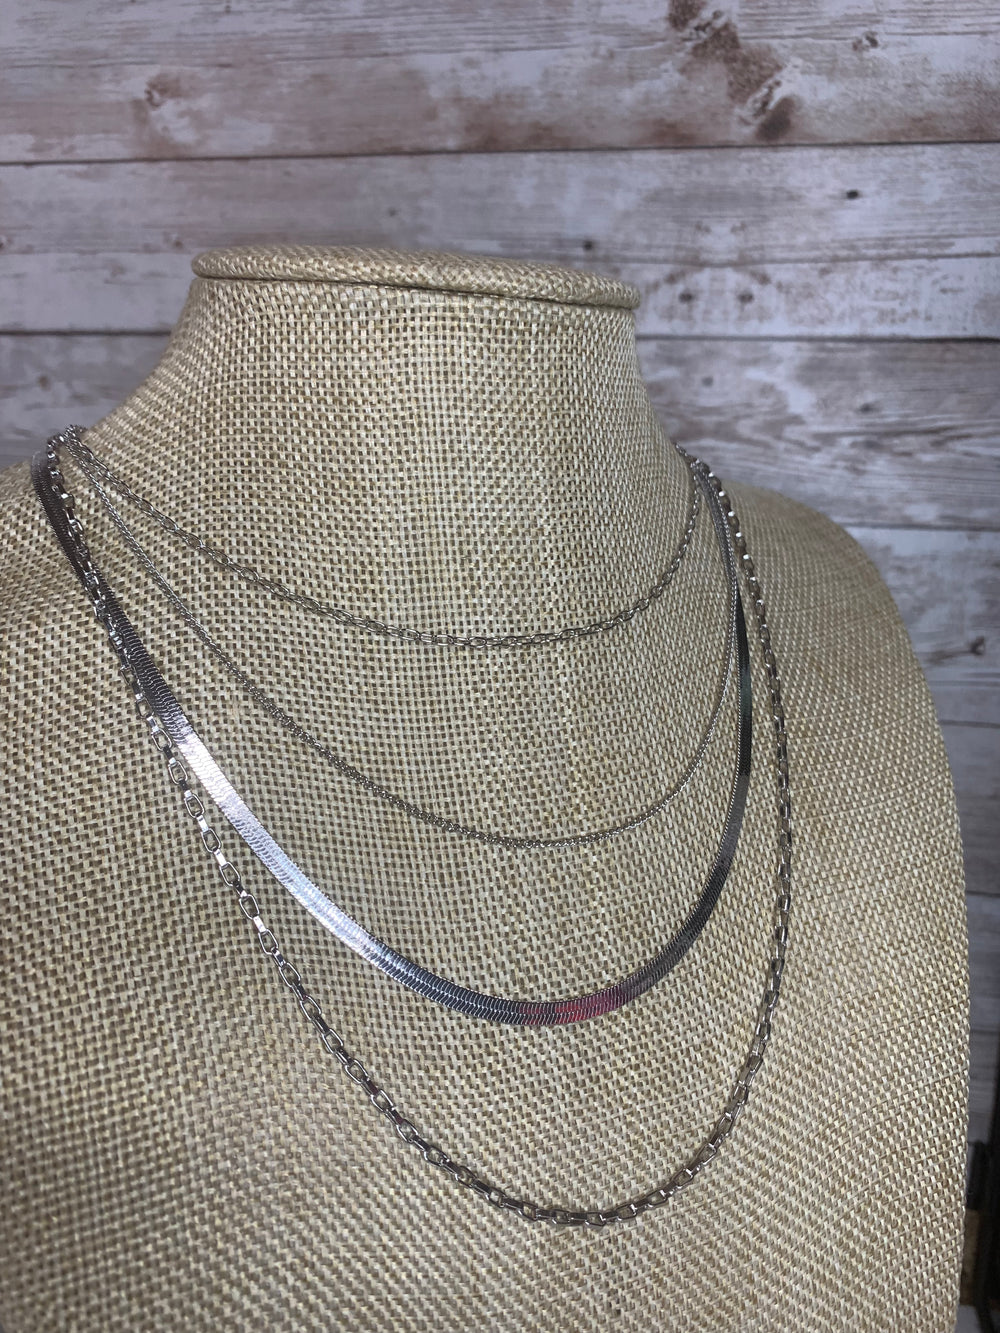 Simplicity Layered Necklaces